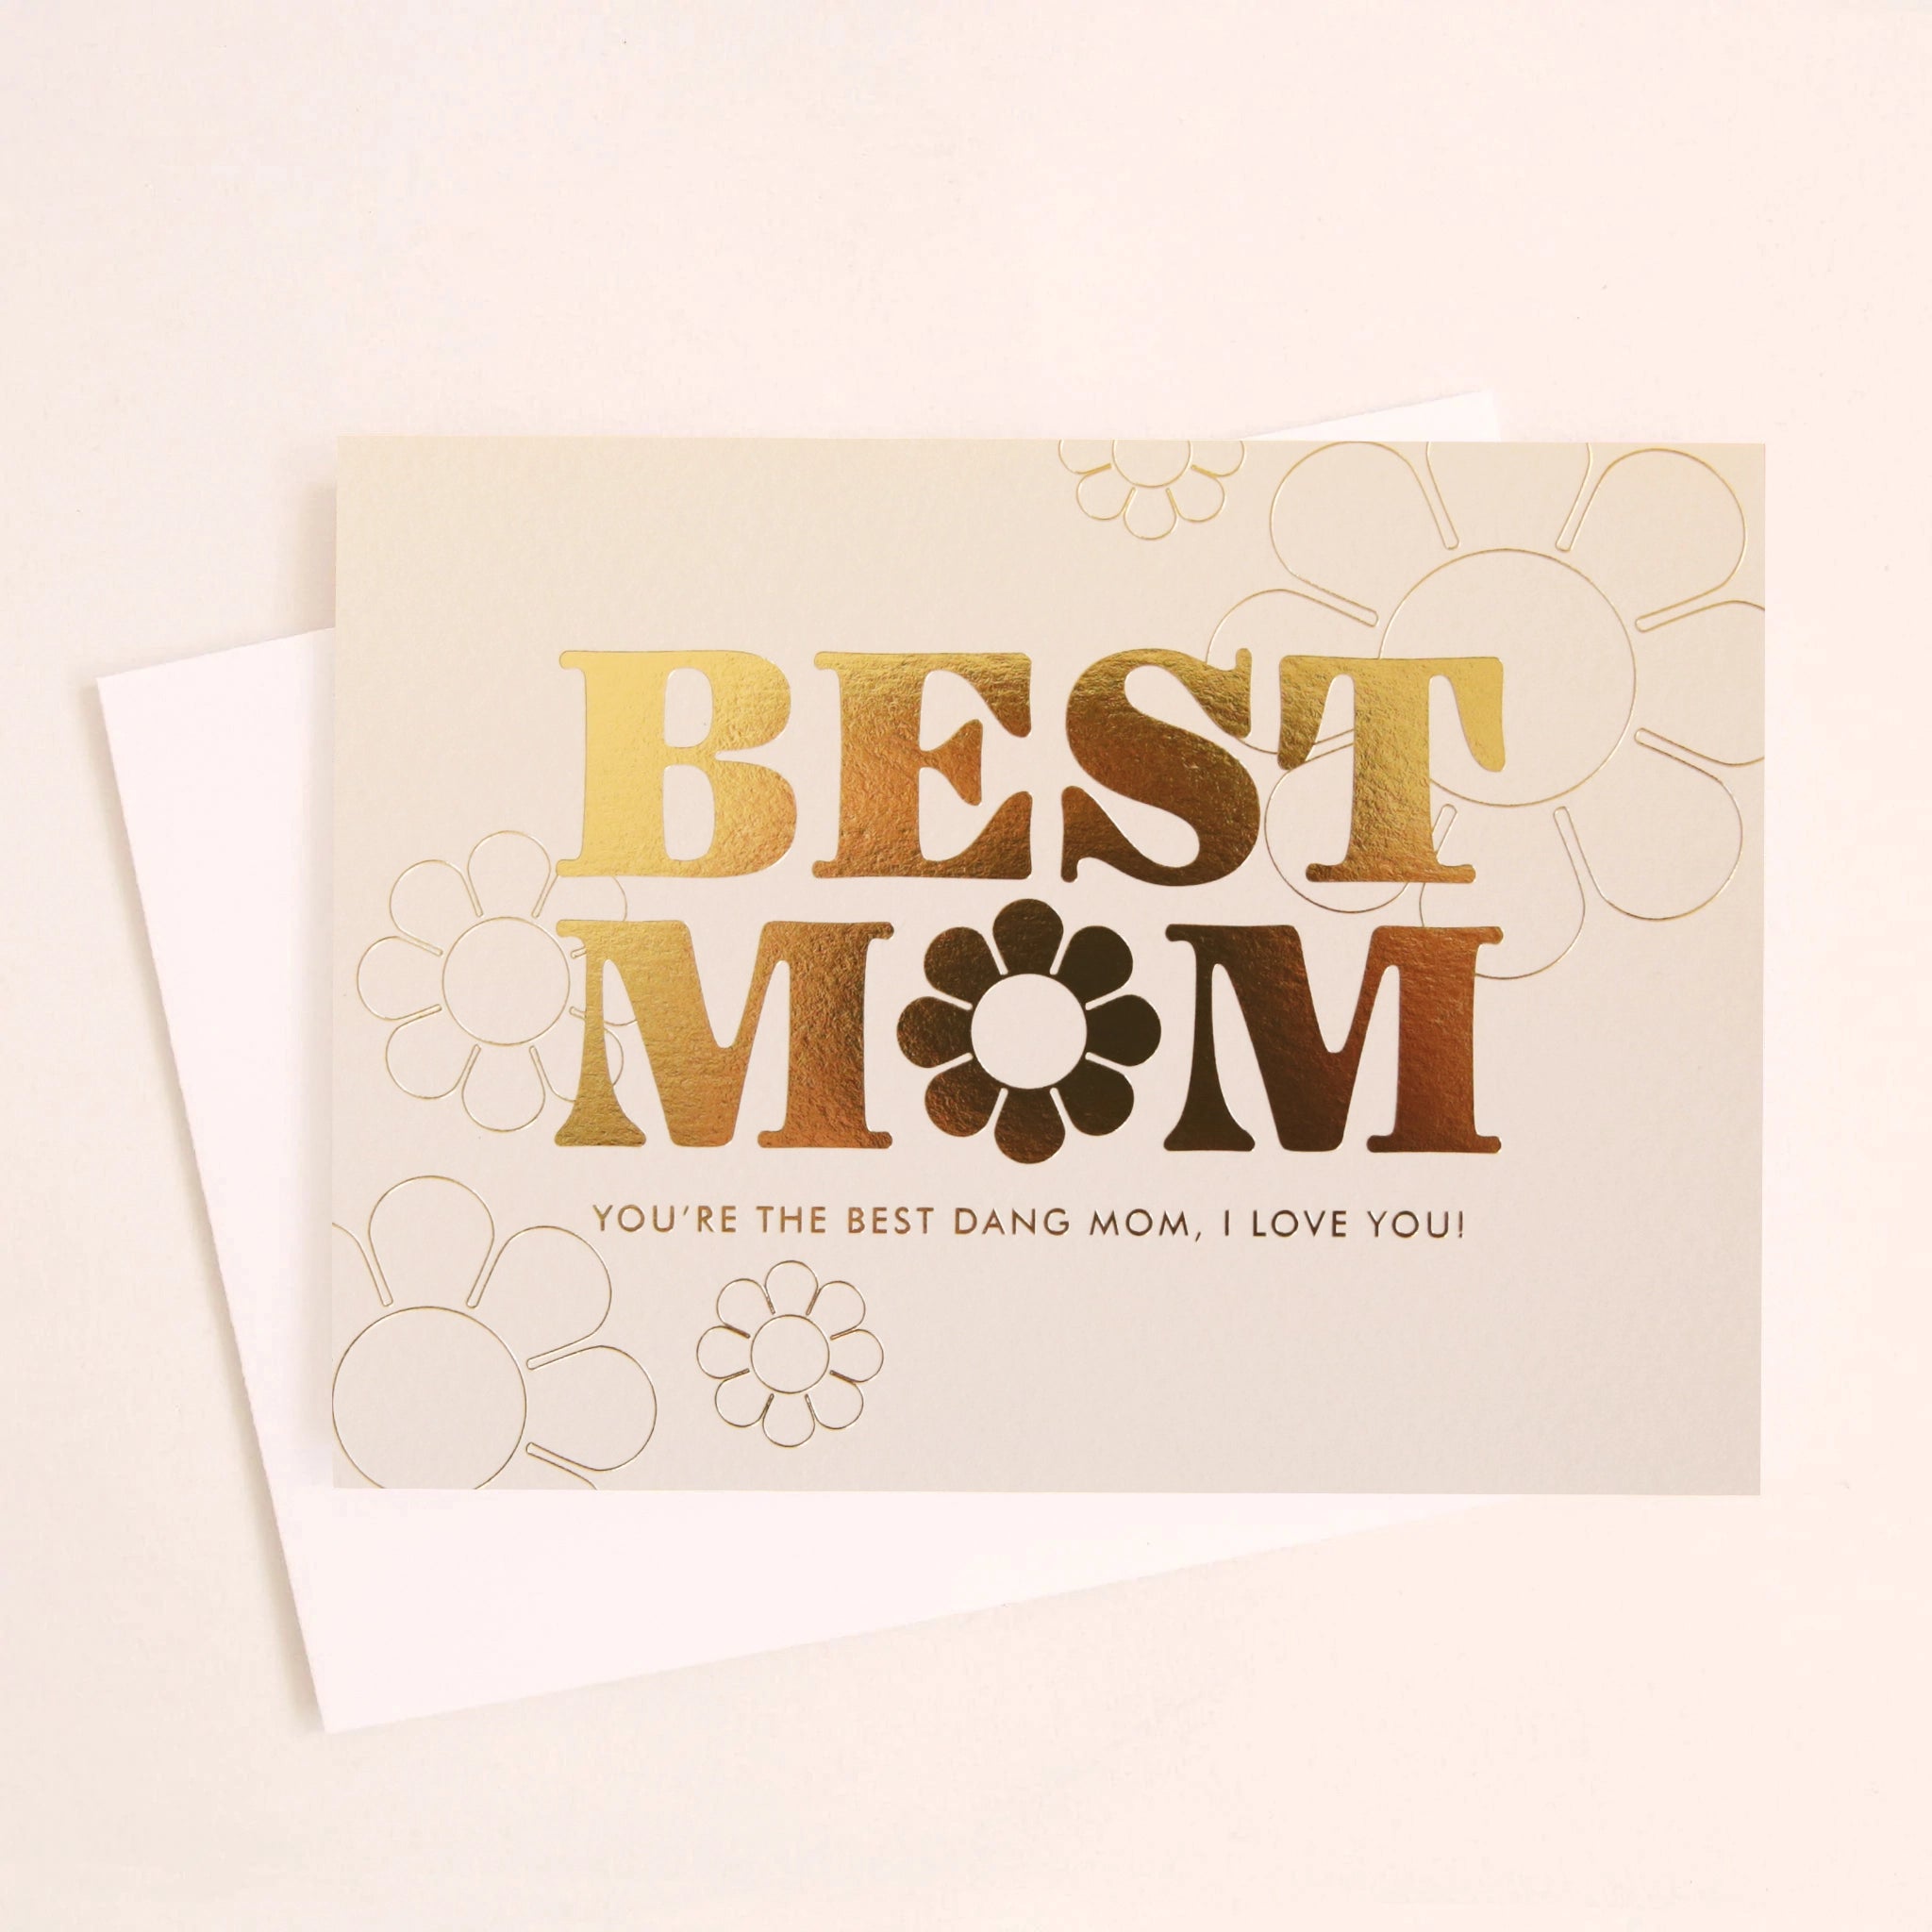 A cream colored card with gold foil lettering that reads, "Best Mom, You're The Best Dang Mom, I Love You!". The 'o' in 'Mom' is a daisy. There are thin gold outlines of daisies in the top right corner and the bottom left. The card is photographed with a coordinating white envelope that is included with purchase.